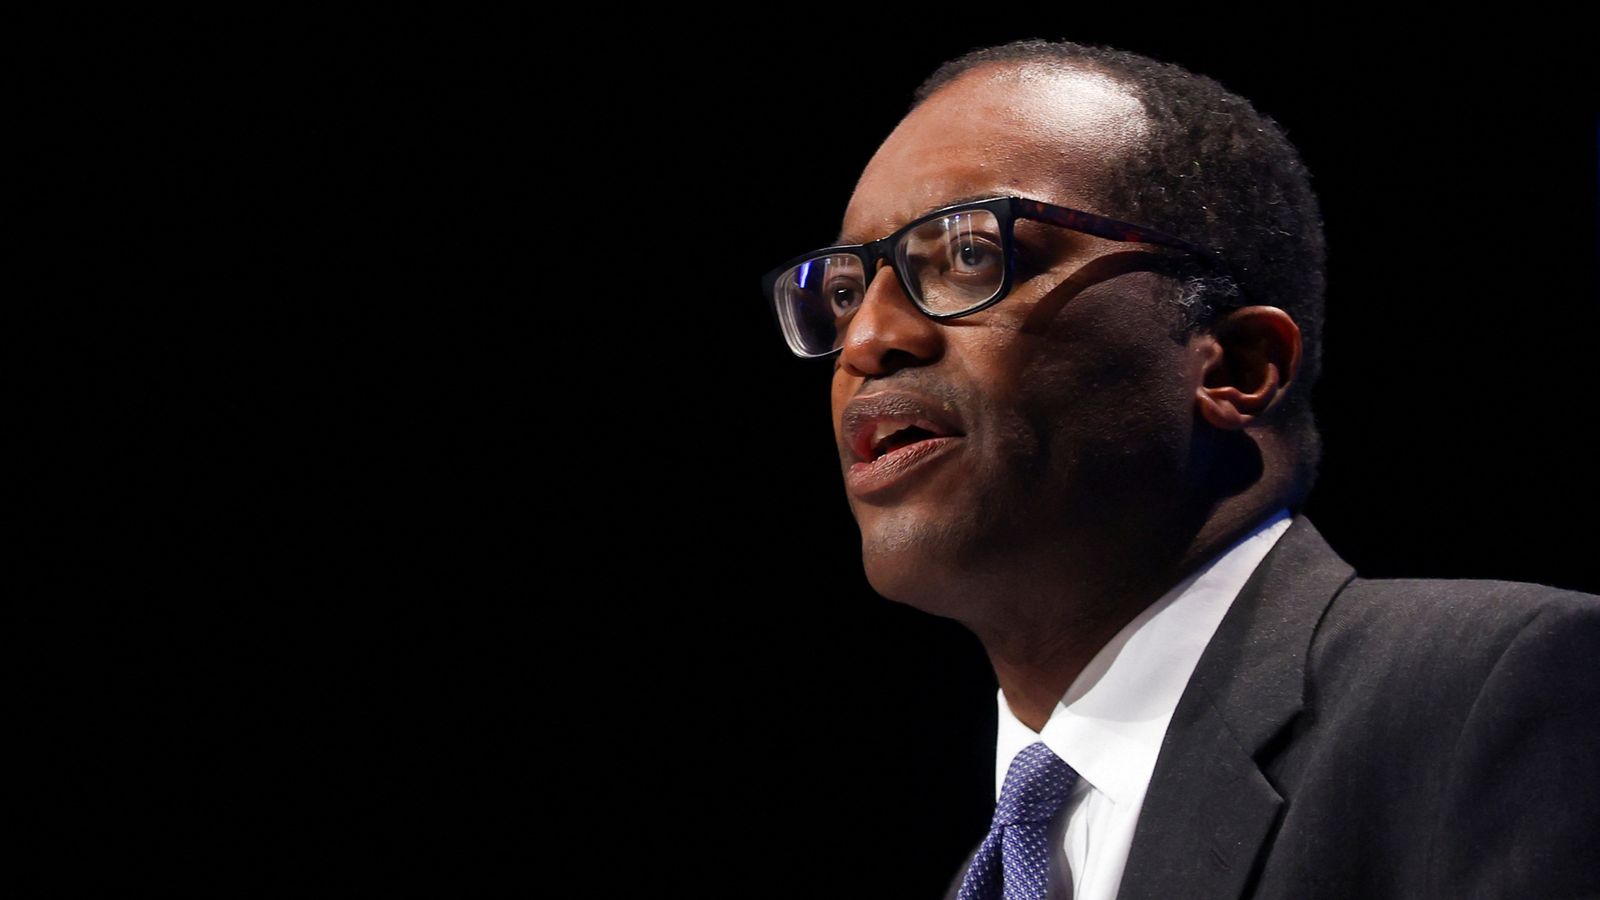 Chancellor Kwasi Kwarteng insists he is 'not going anywhere' - and hints at mini-budget U-turn